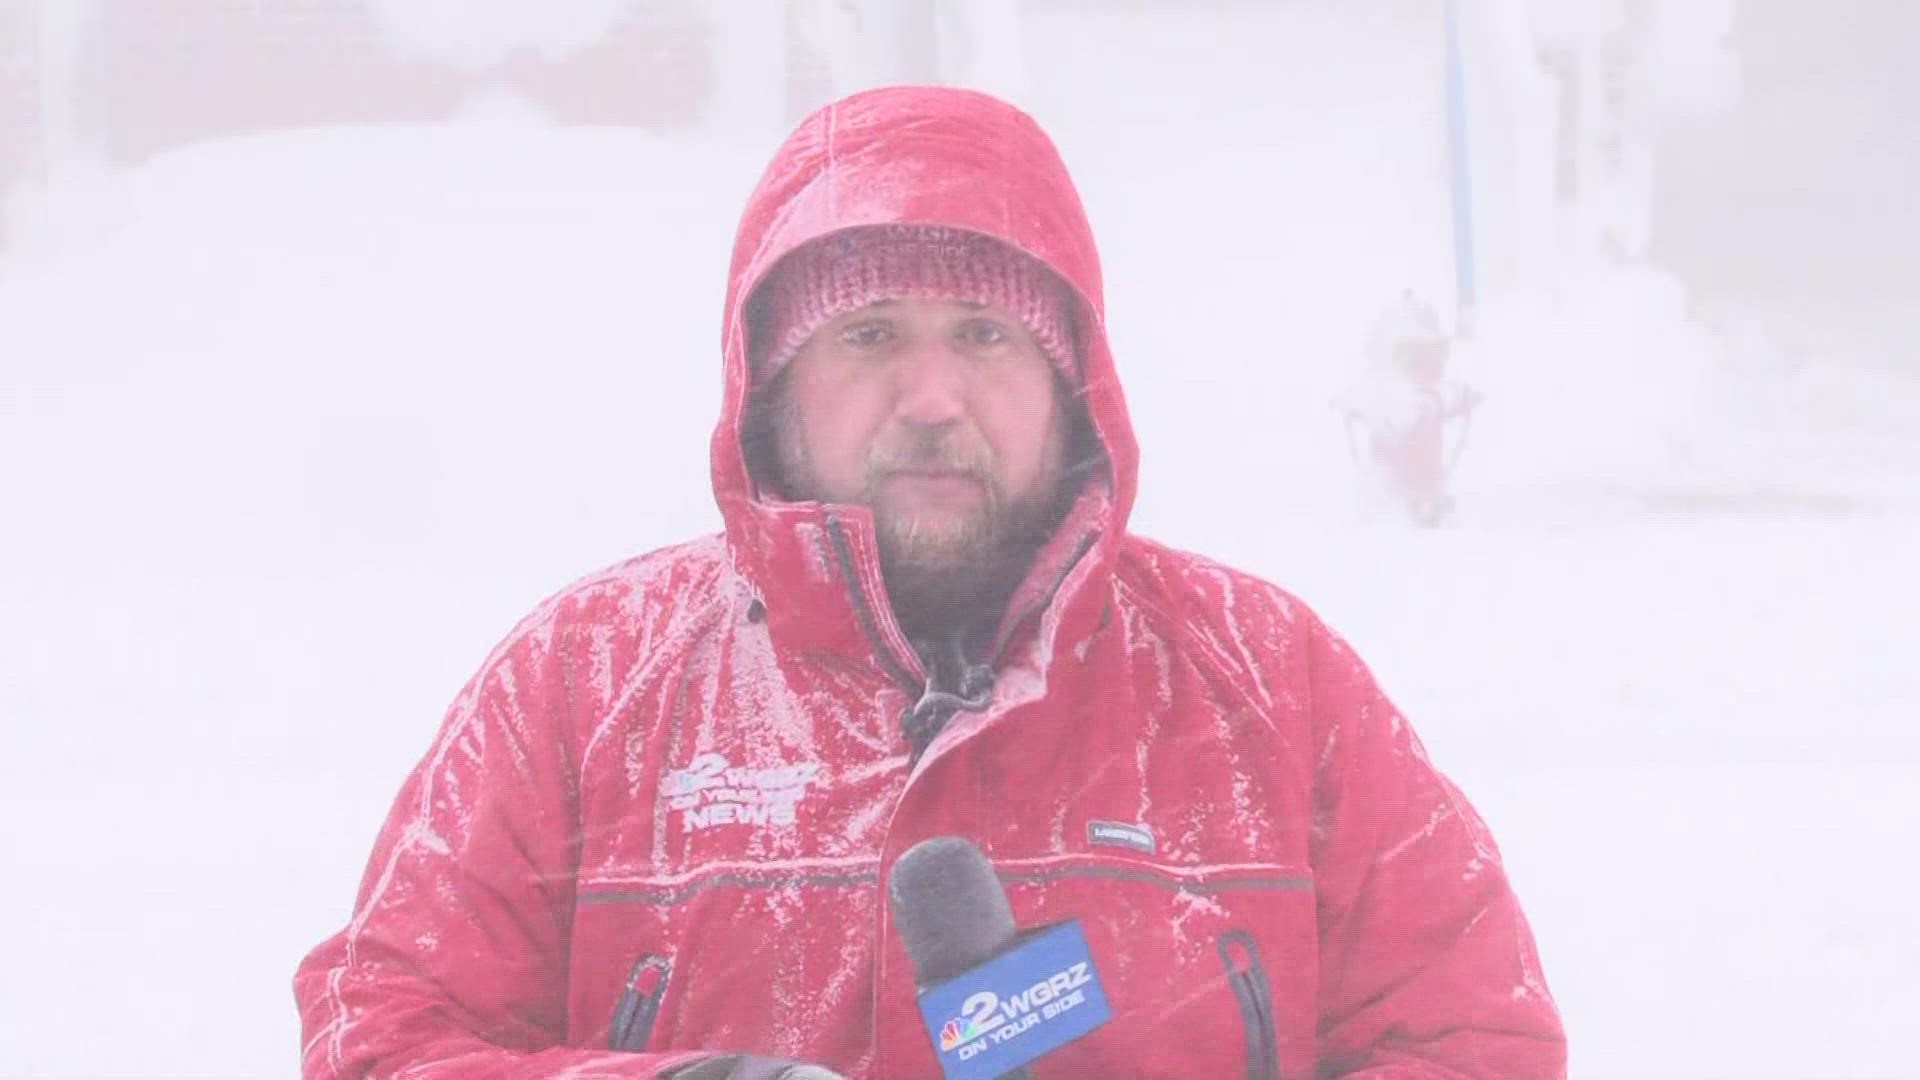 Niagara County Emergency Services Director Jonathan Schultz says all fire departments in the county have been mobilized to help stranded drivers.